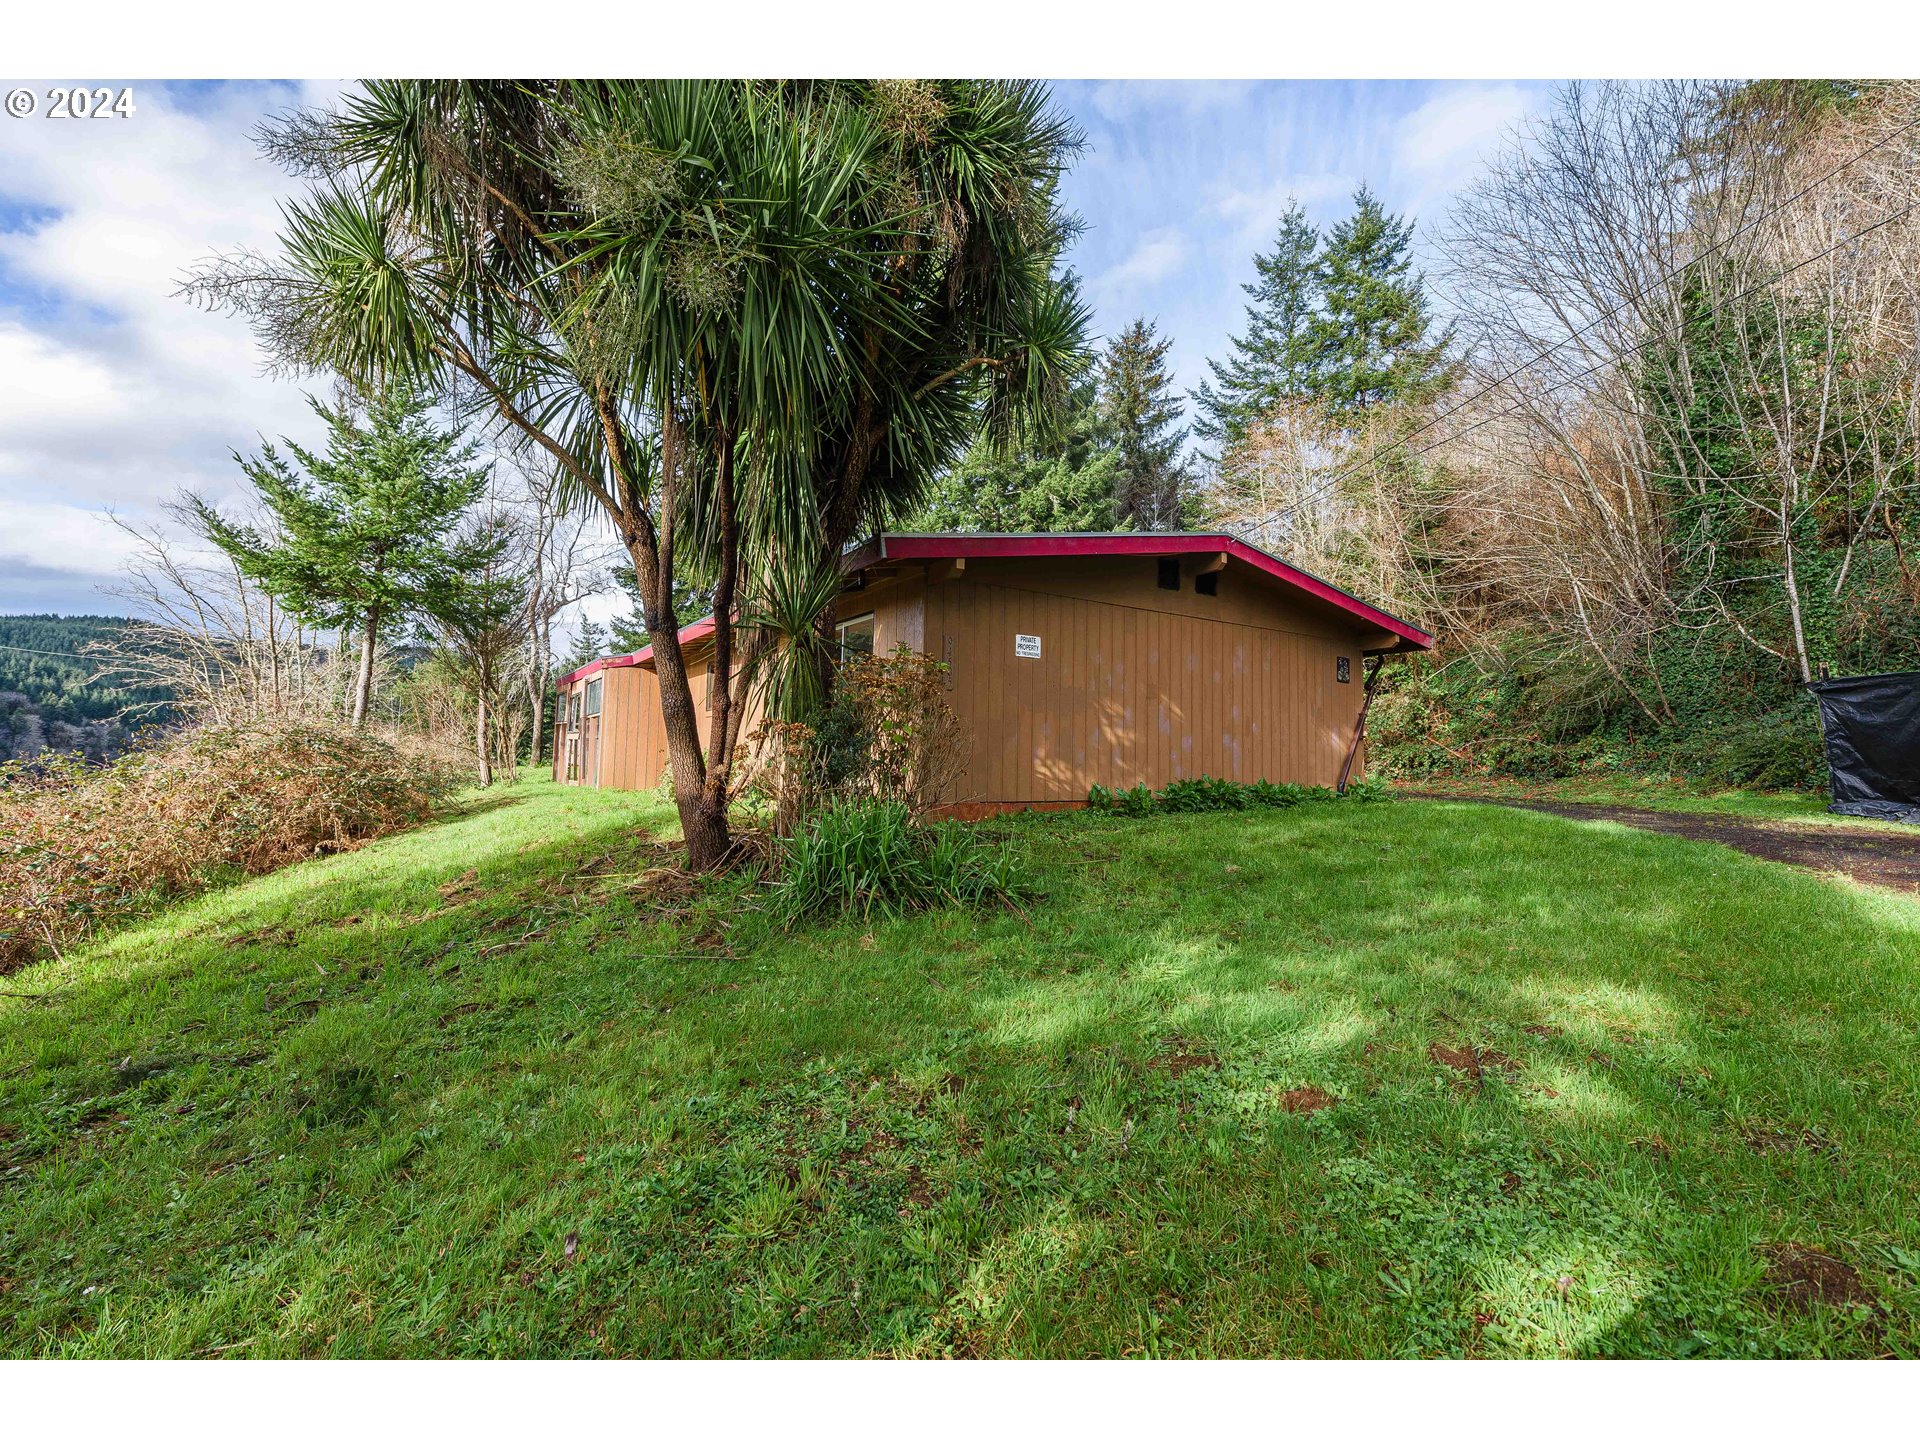 94505 GOLF COURSE LN, North Bend, OR 